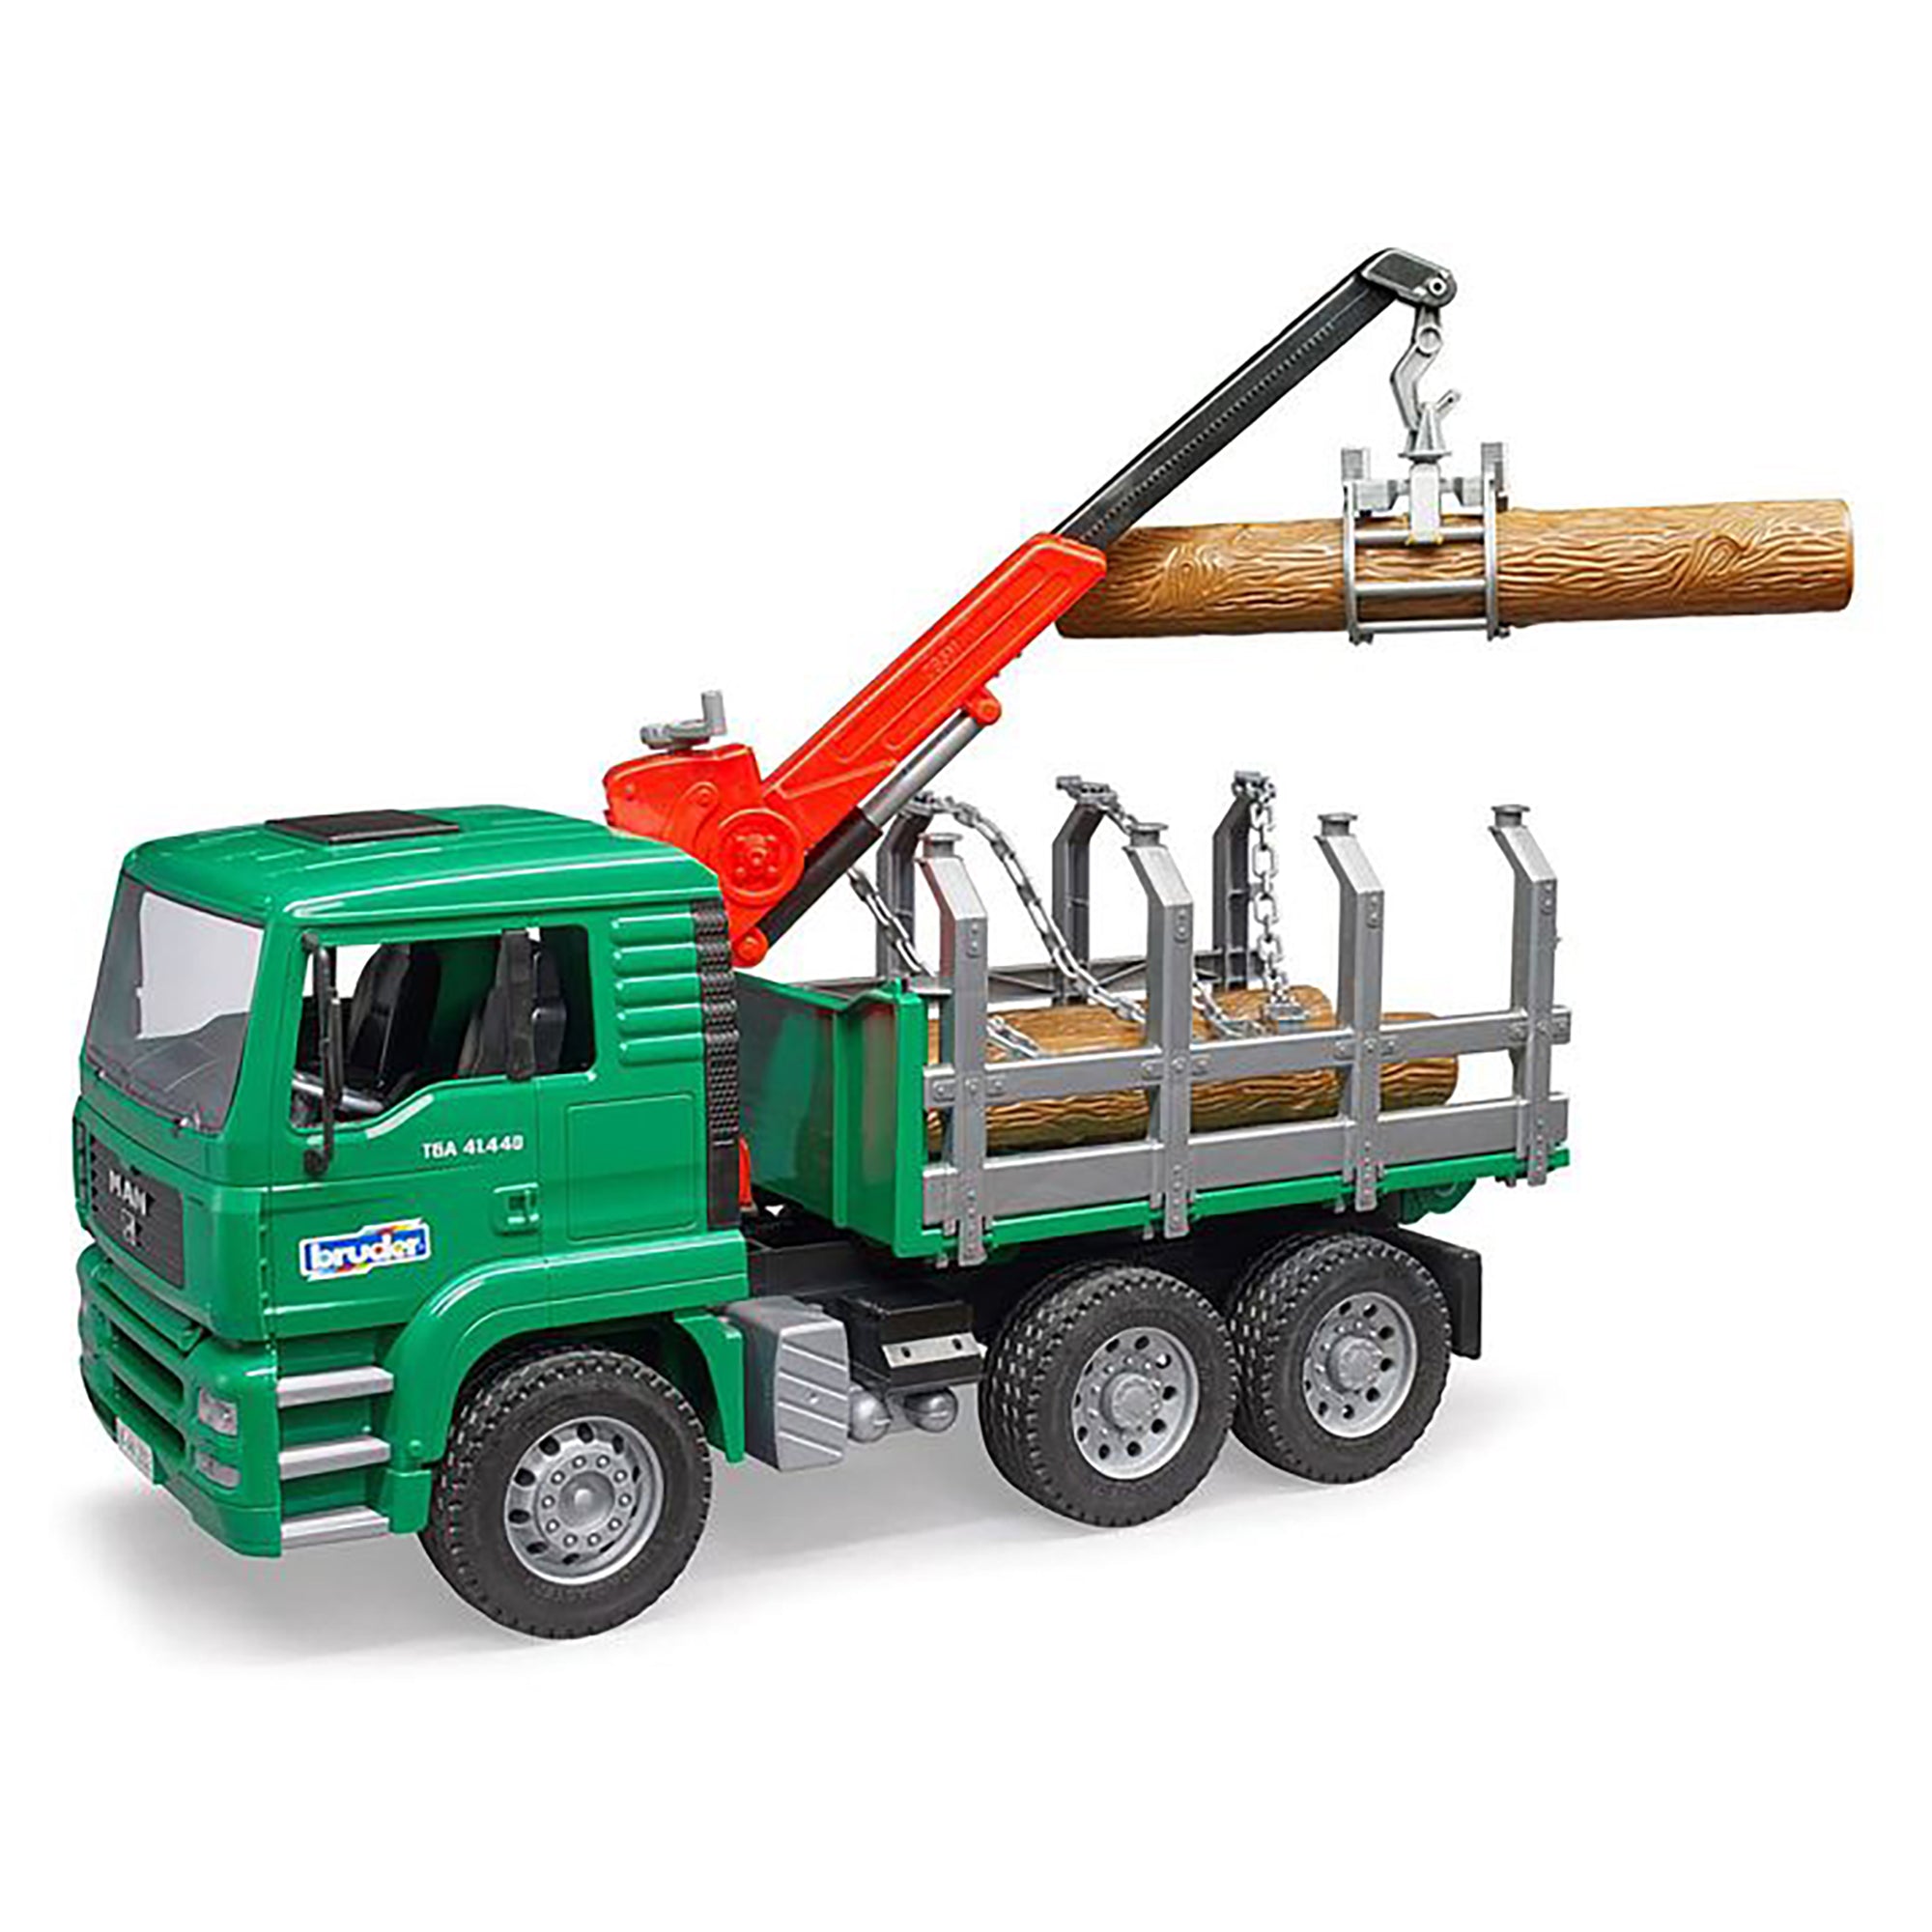 Bruder 1/16 MAN Timber Truck with Loading Crane and Trunks